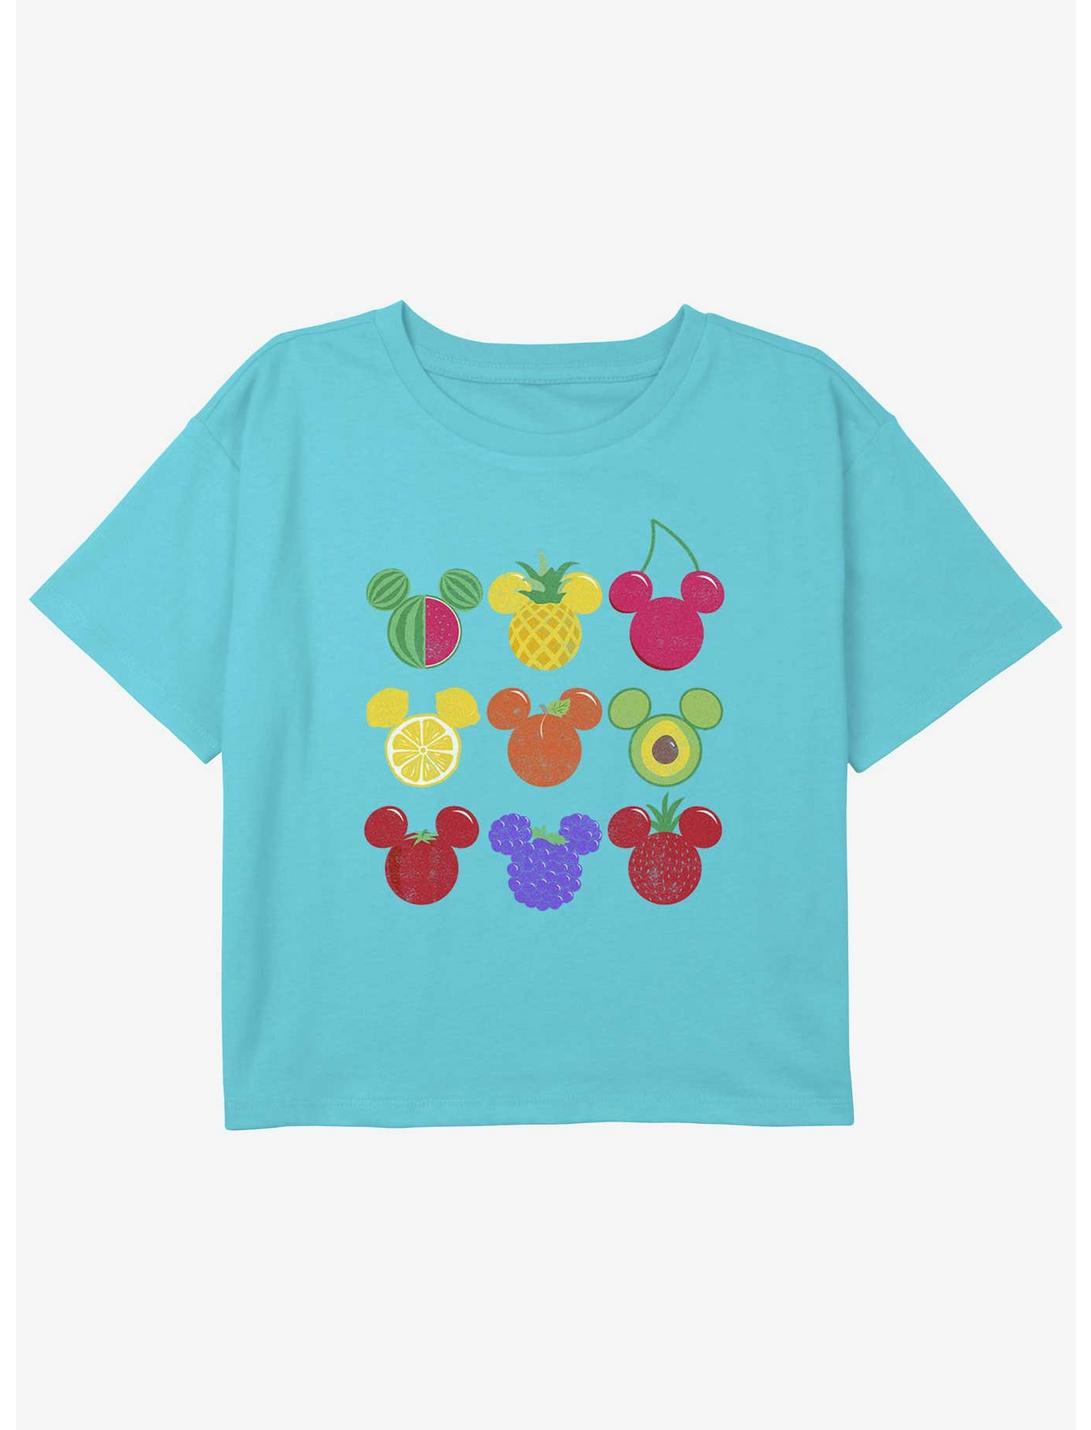 Disney Mickey Mouse Fruit Heads Girls Youth Crop T-Shirt, BLUE, hi-res